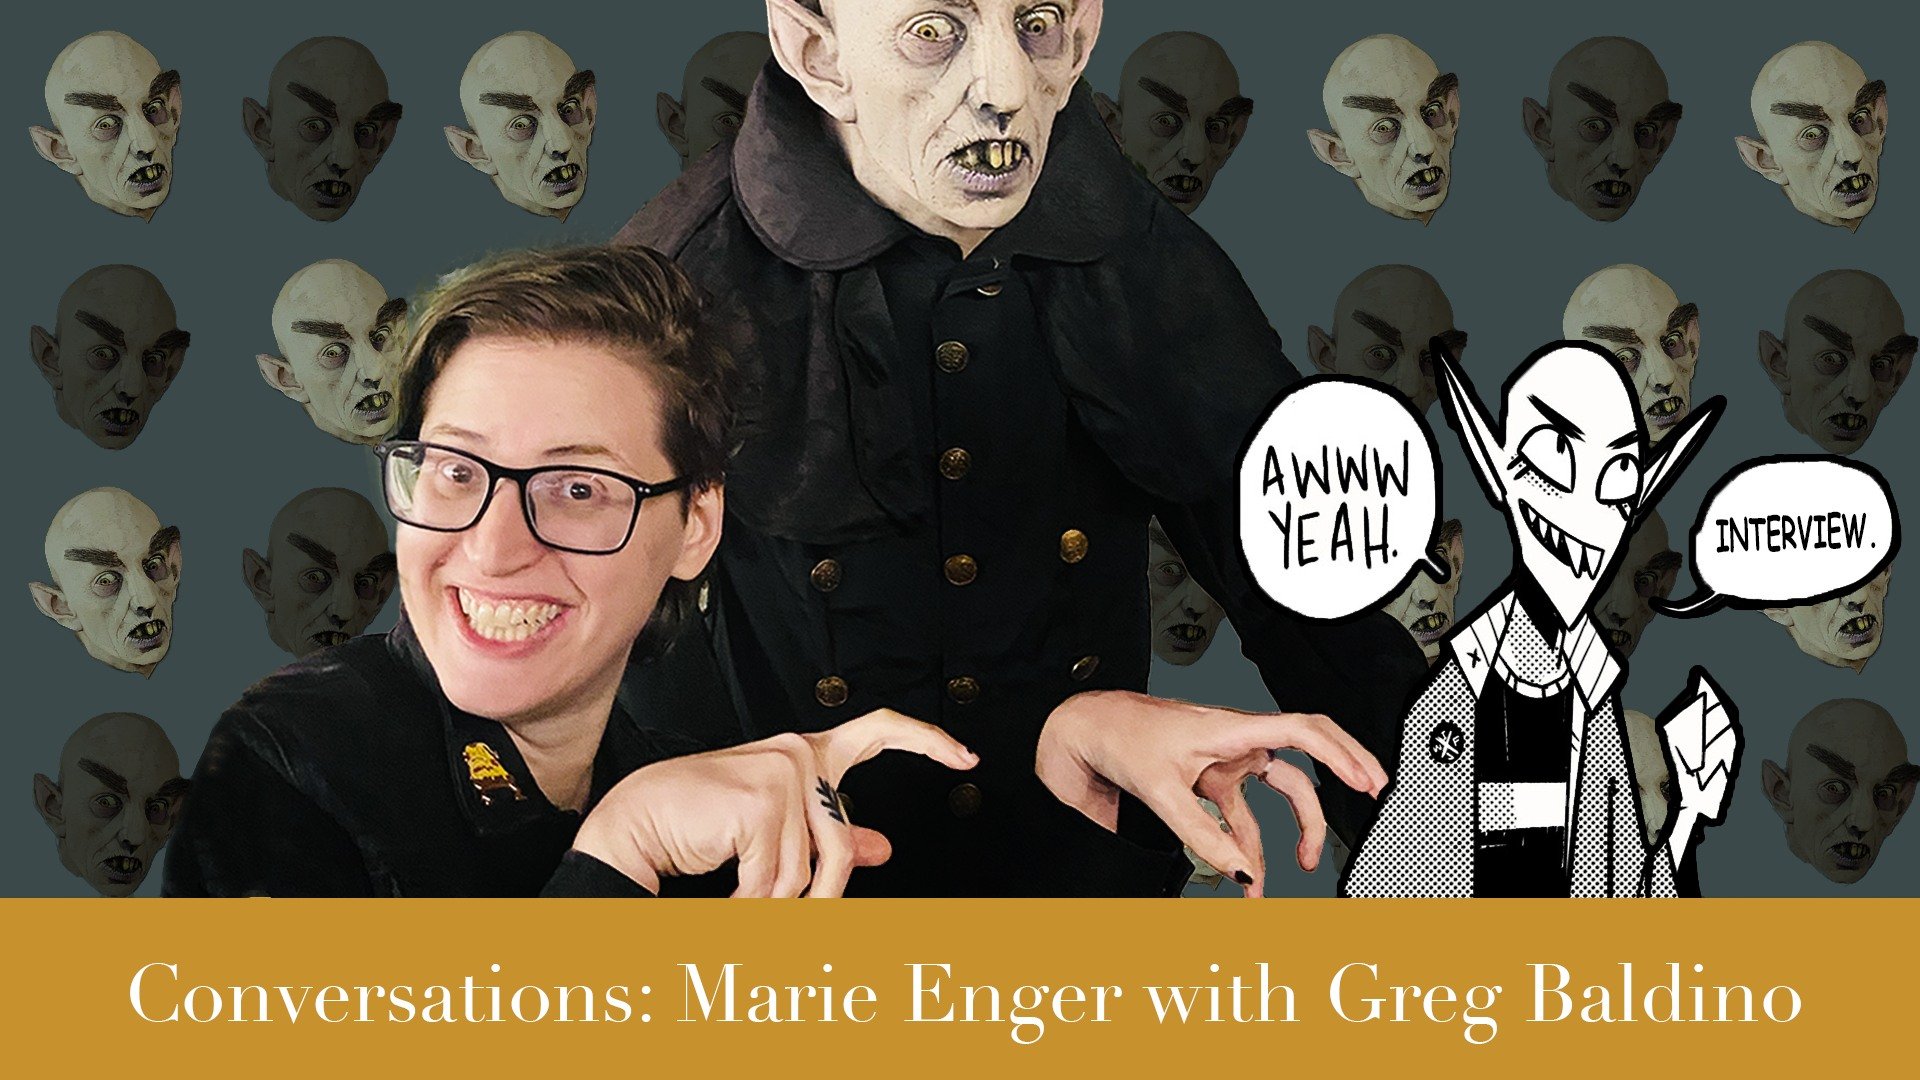 Check out the latest edition to our ABH Conversation series: Cartoonist Marie Enger interviewed by Greg Baldino. Co-creator on the recent graphic novels Where Black Stars Shine with Nadia Shammas and Underworld Kingdom with Christof Bogacs, Marie Eng